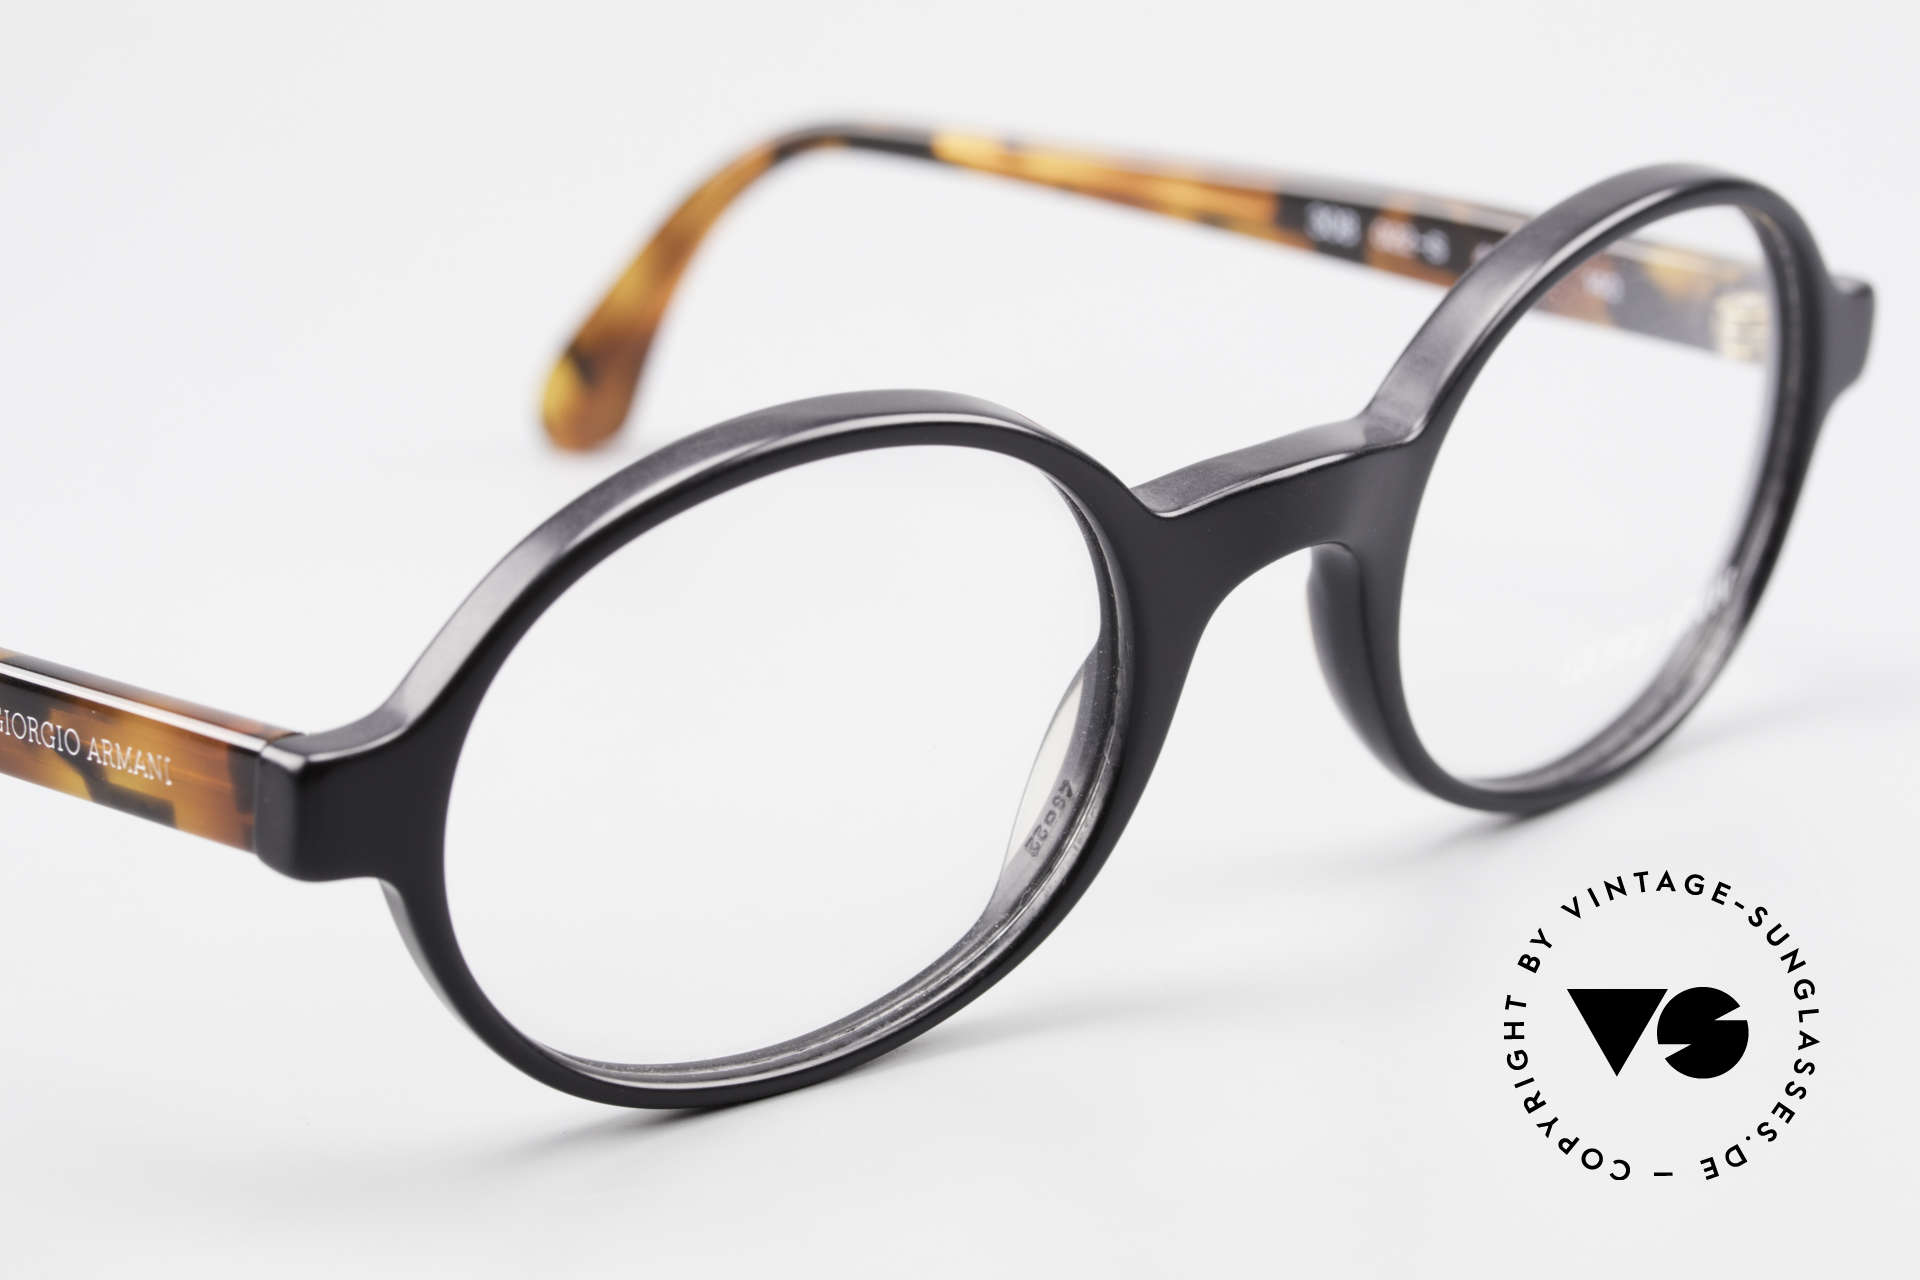 Giorgio Armani 308 Oval 80's Vintage Eyeglasses, NO retro specs, but a unique 30 years old ORIGINAL!, Made for Men and Women